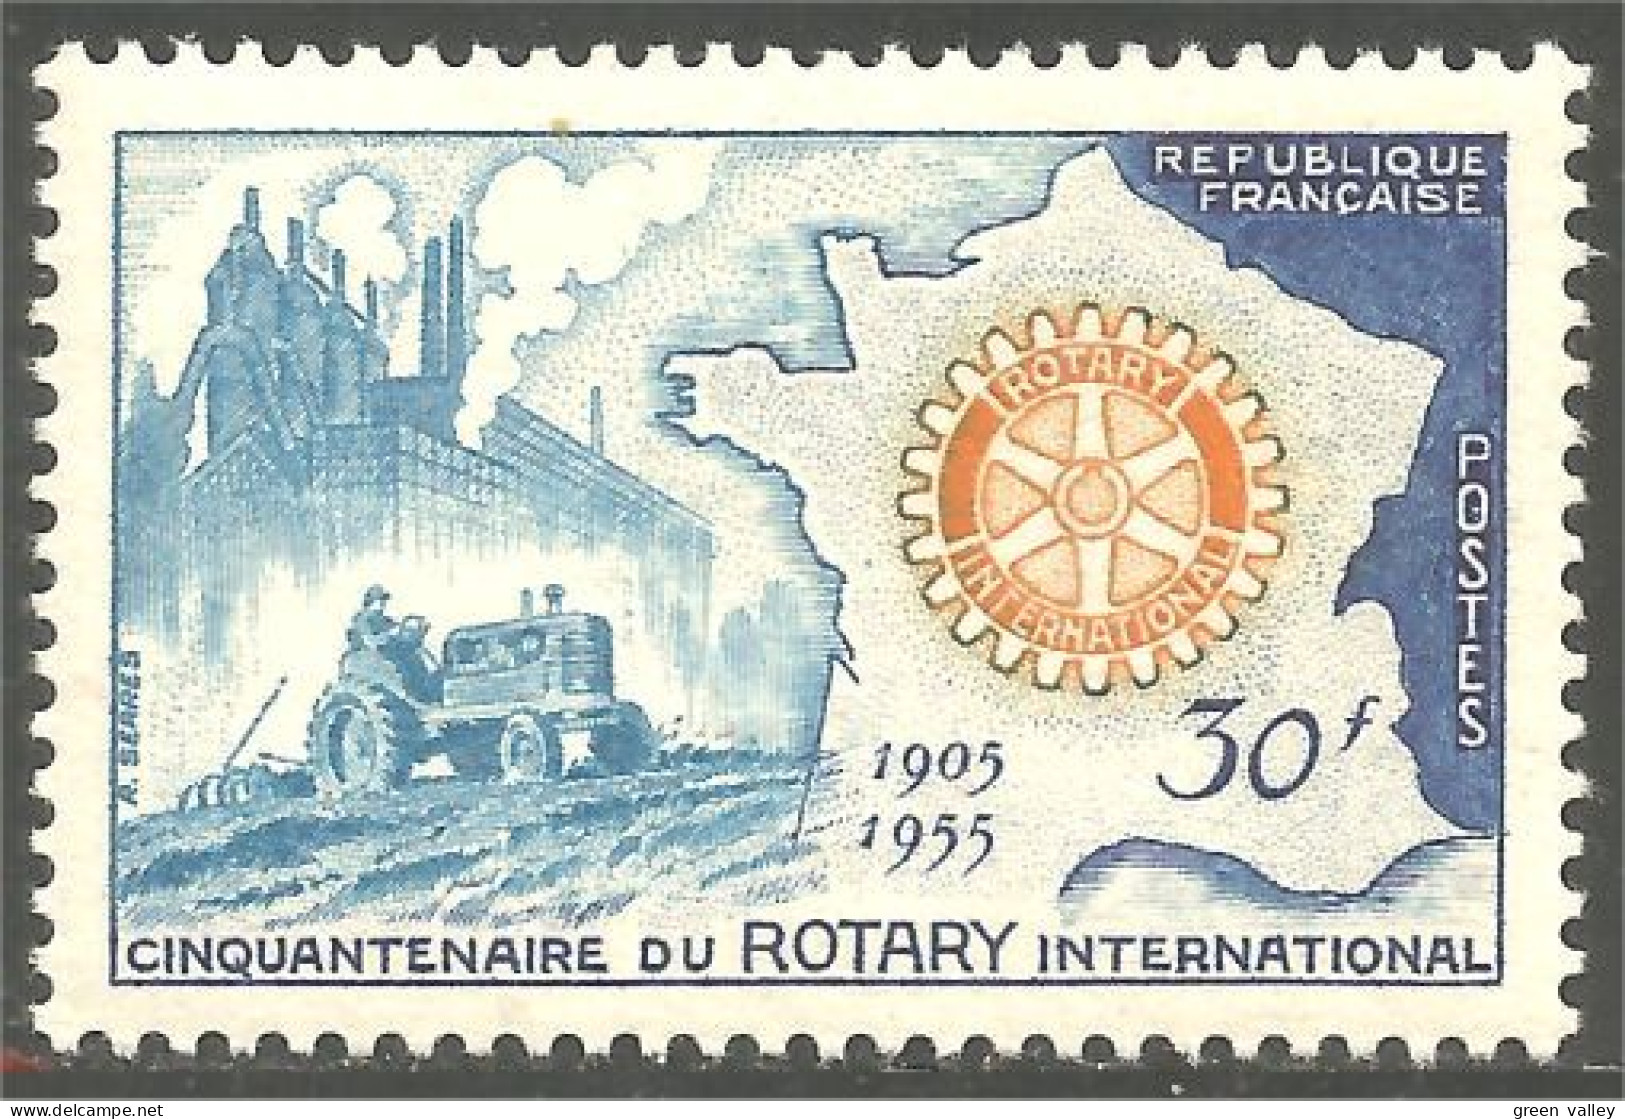 340 France Yv 1009 Agriculture Farming Tracteur Tractor MNH ** Neuf SC (1009-1e) - Agricultura